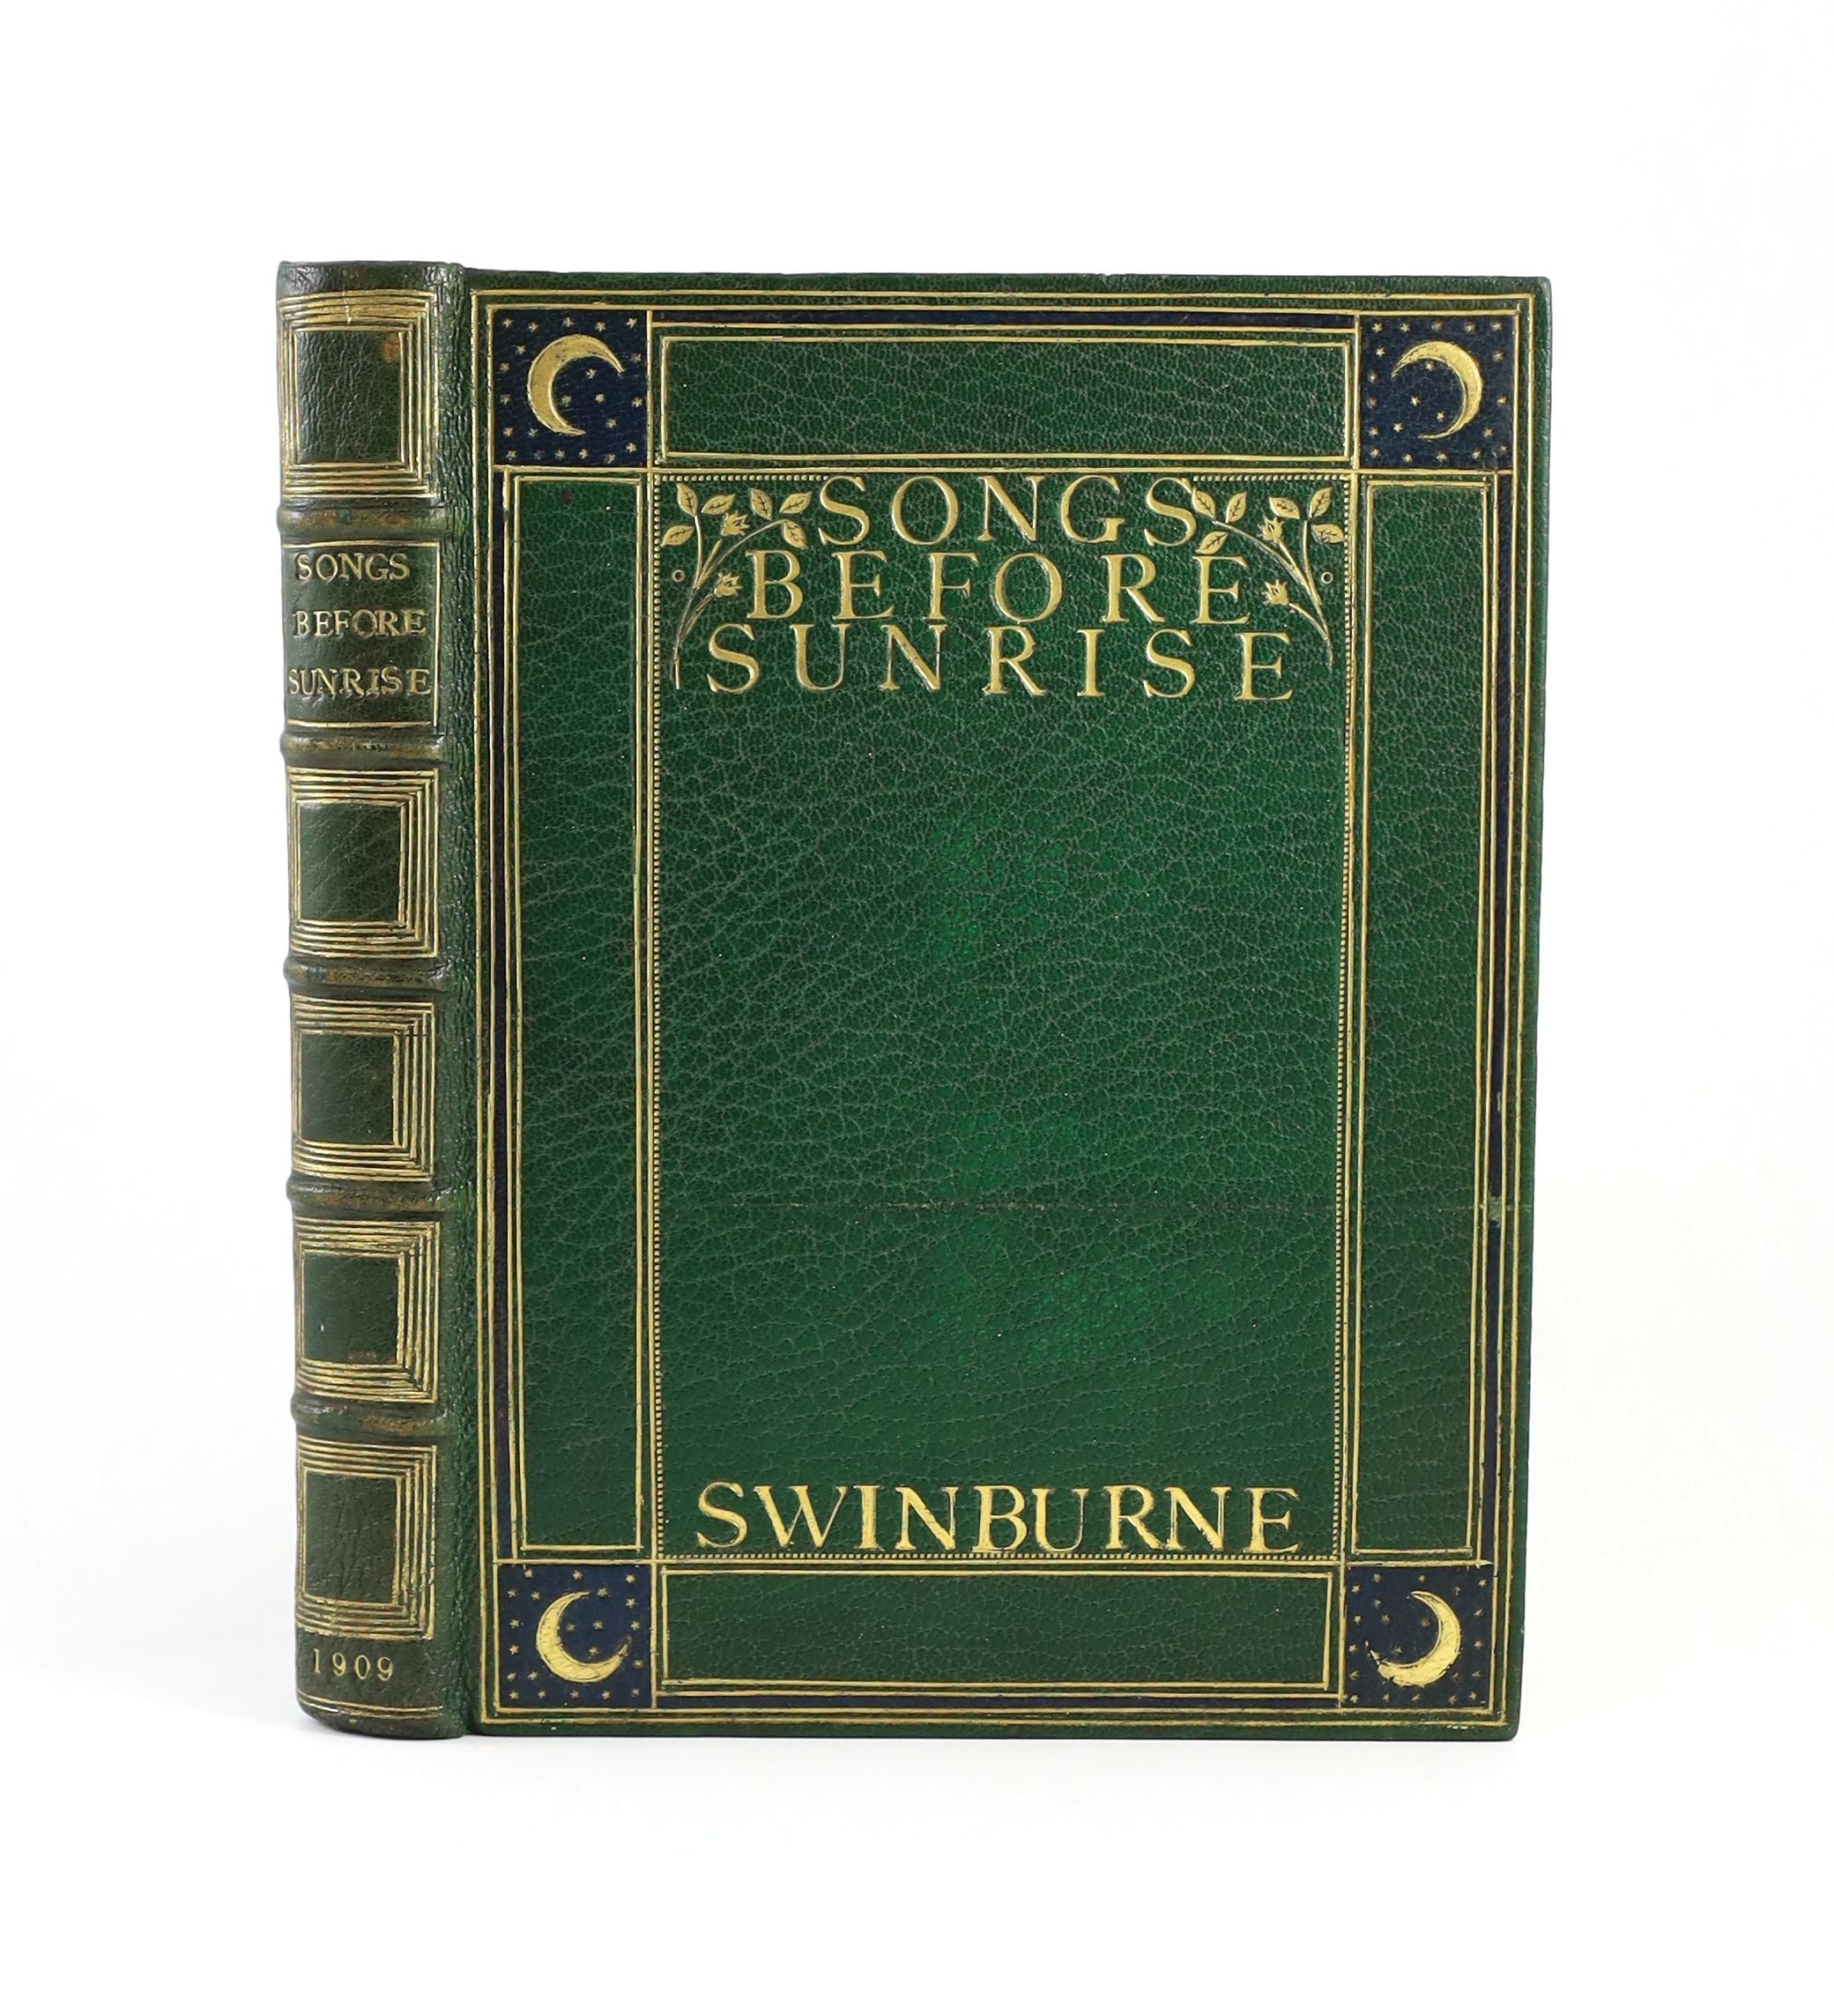 Swinburne, Algernon Charles - Songs Before Sunrise, one of 650, 4to, fine green morocco gilt binding by M. Dunkels, published for the Florence Press by Chatto & Windus, London, 1909